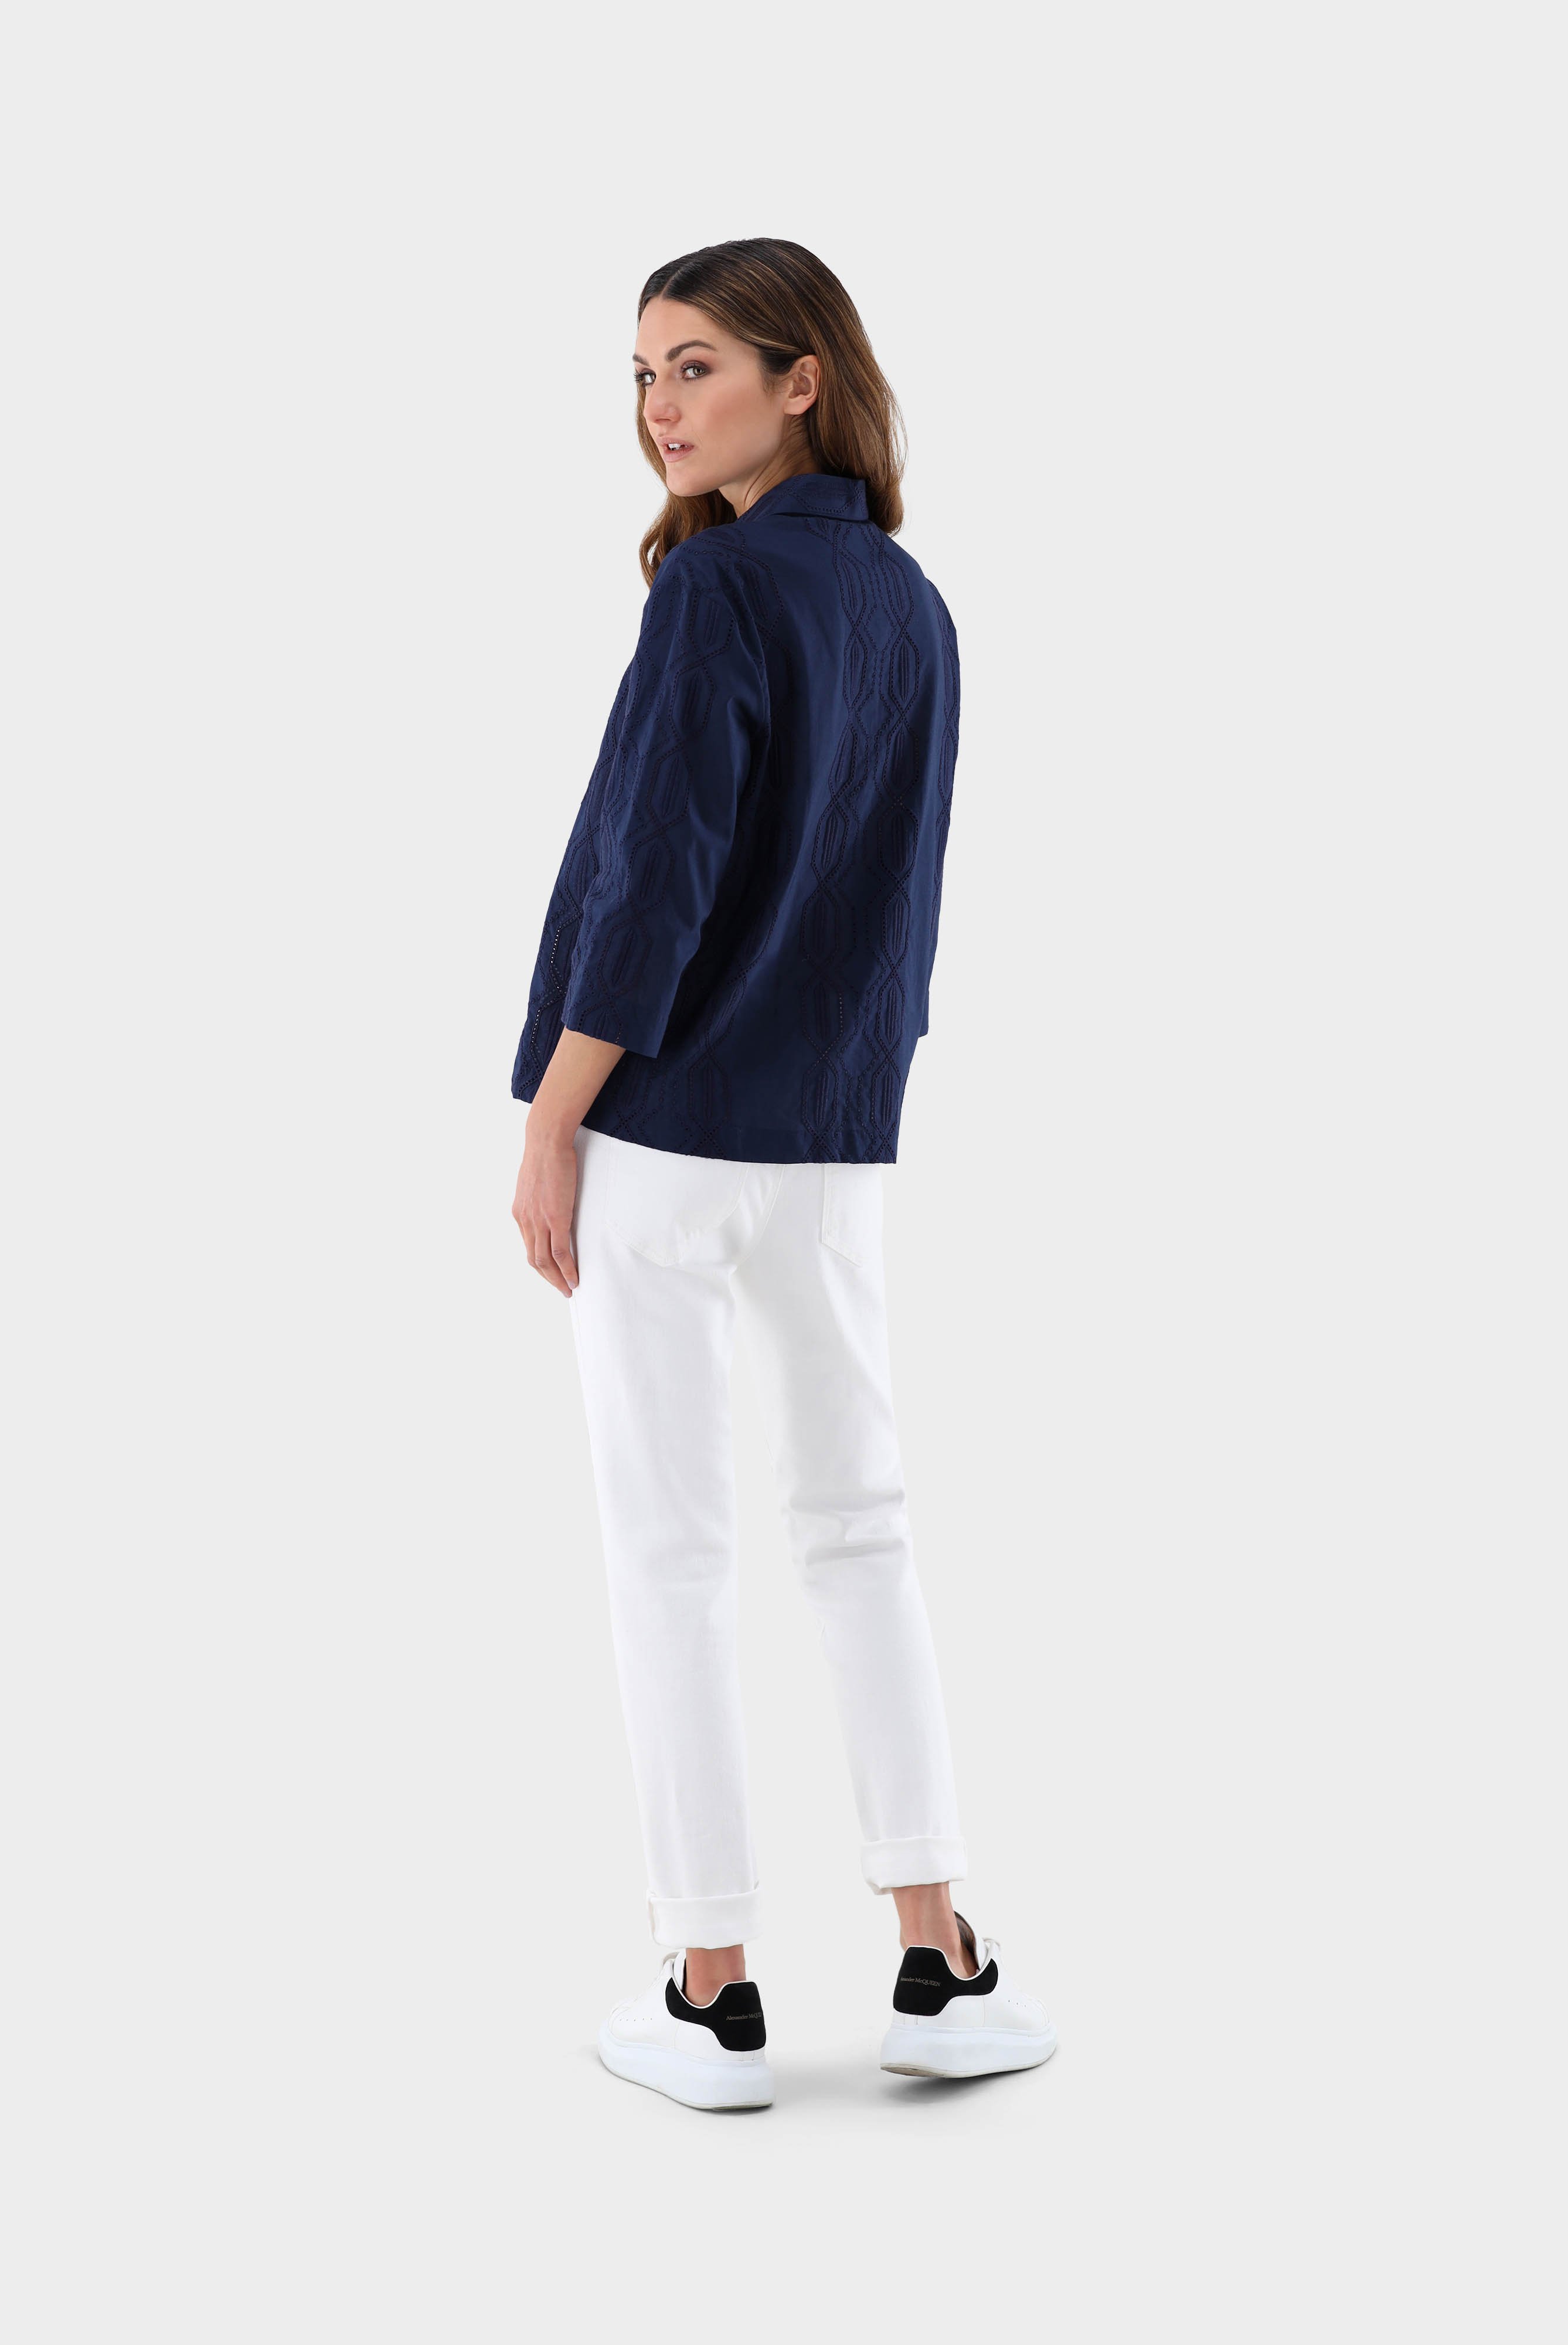 Meisterwerk Blouses+Boxy Shirt with Embroidery+05.521G.5Z.151321.780.32